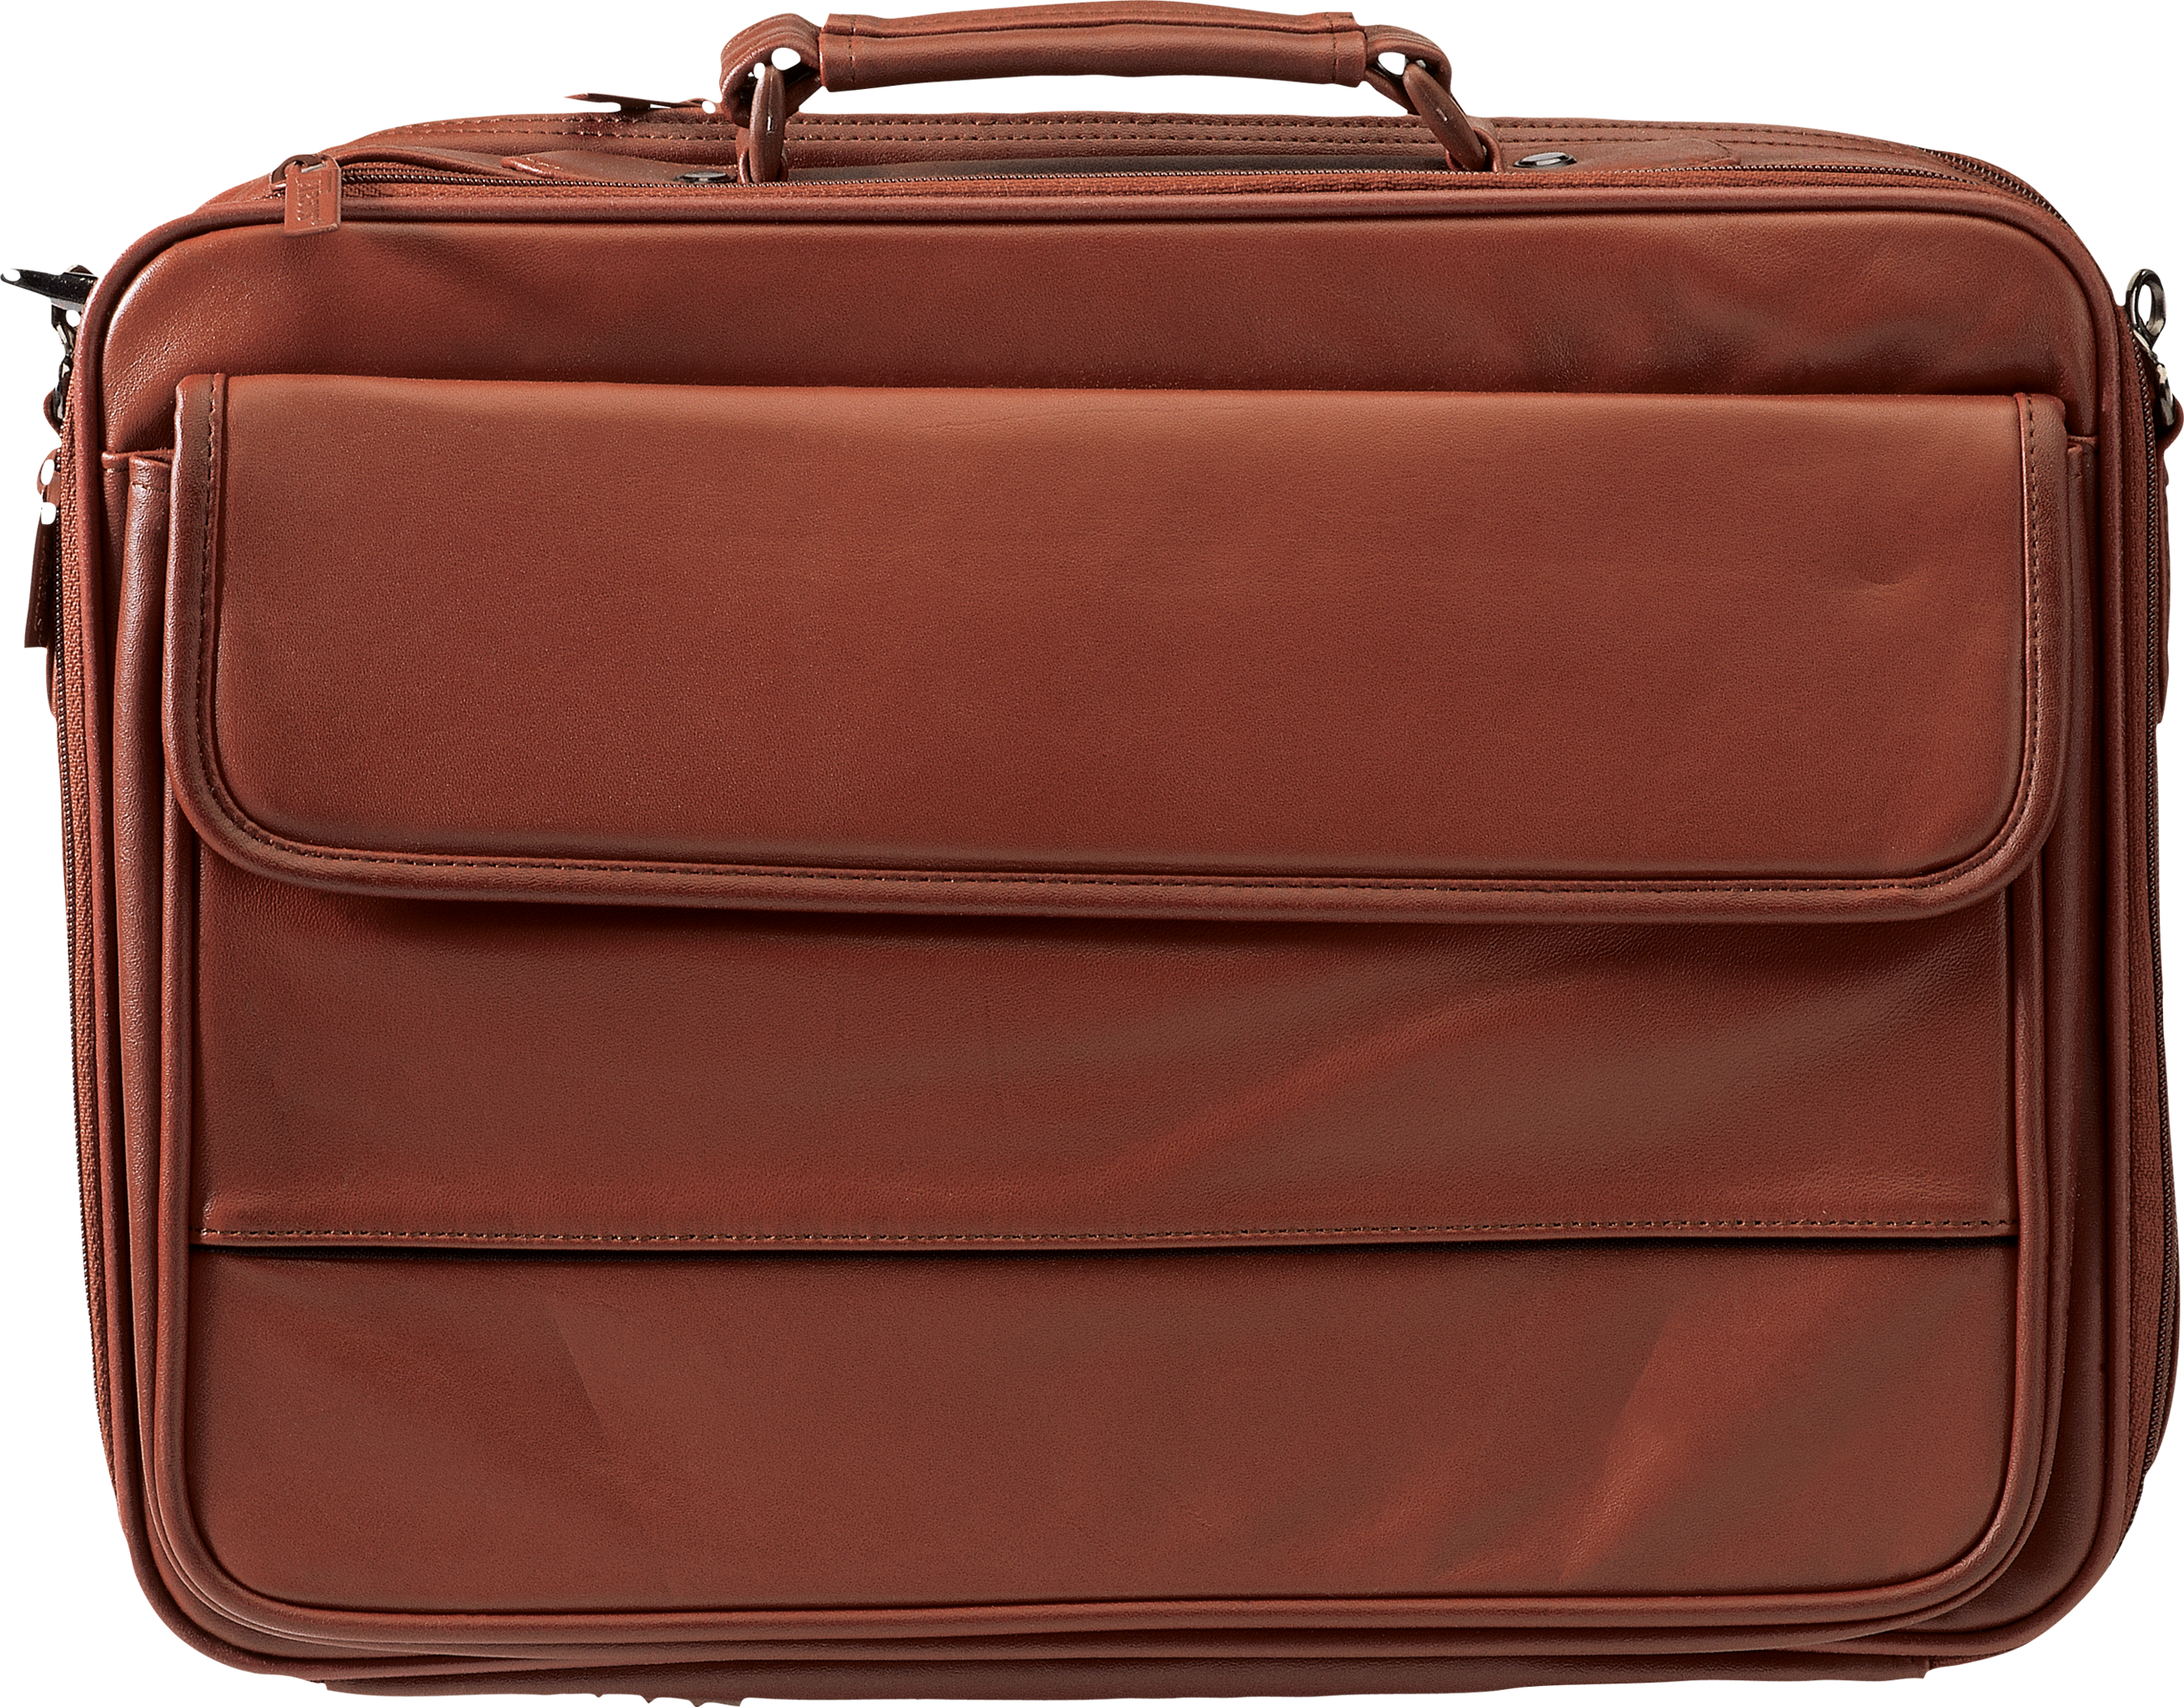 Suitcase HD PNG - 96551